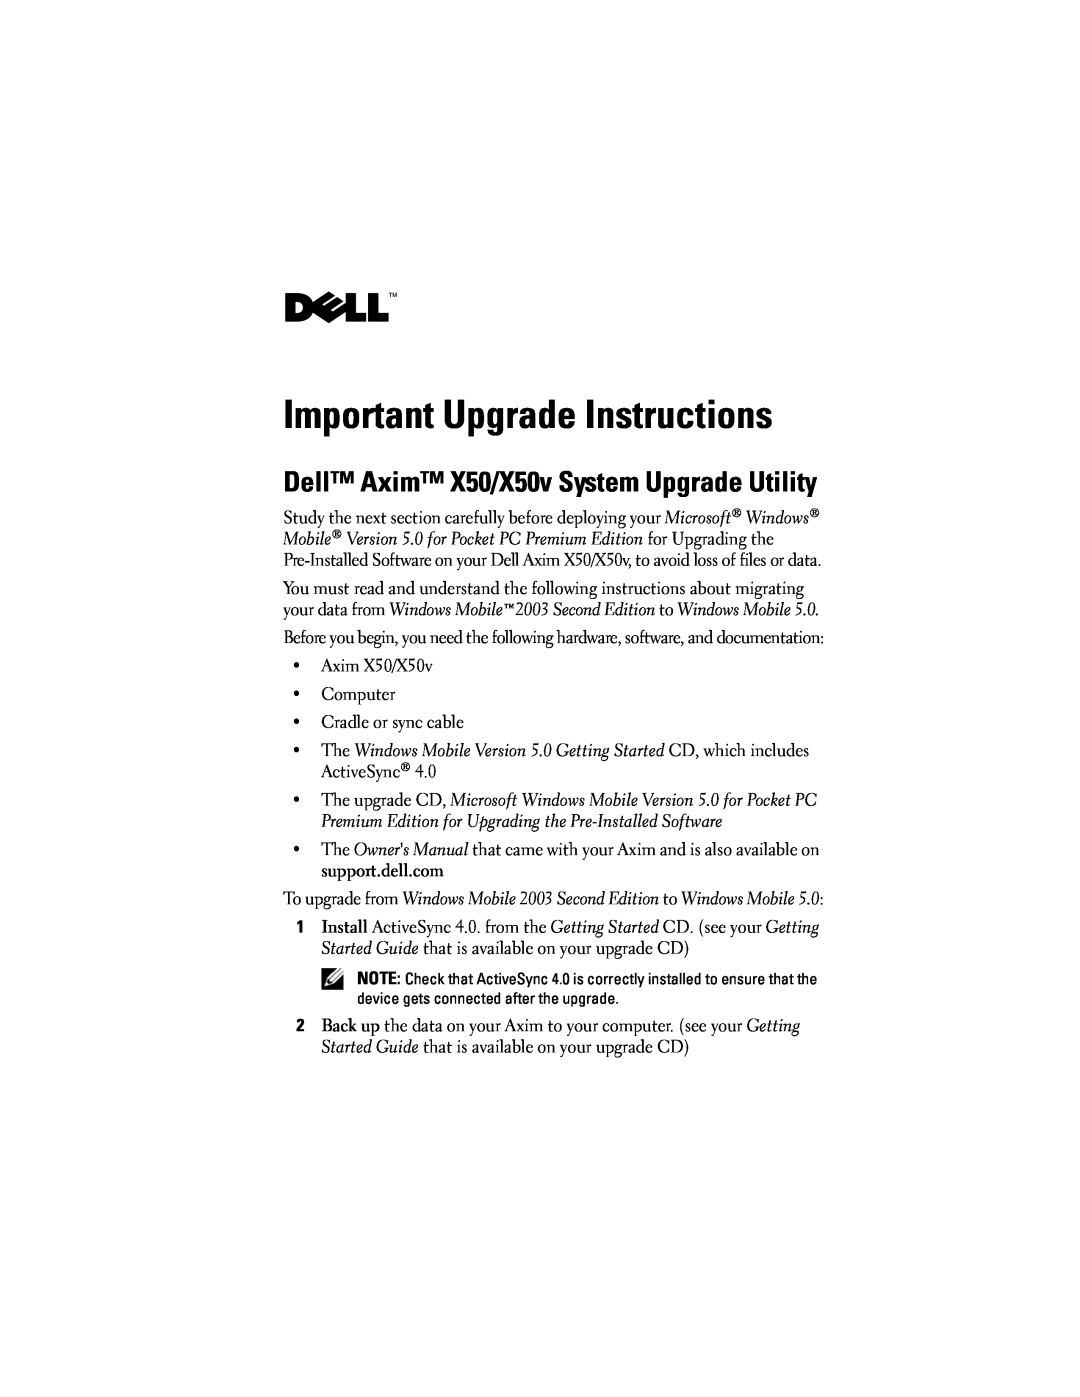 Dell owner manual Important Upgrade Instructions, Dell Axim X50/X50v System Upgrade Utility 